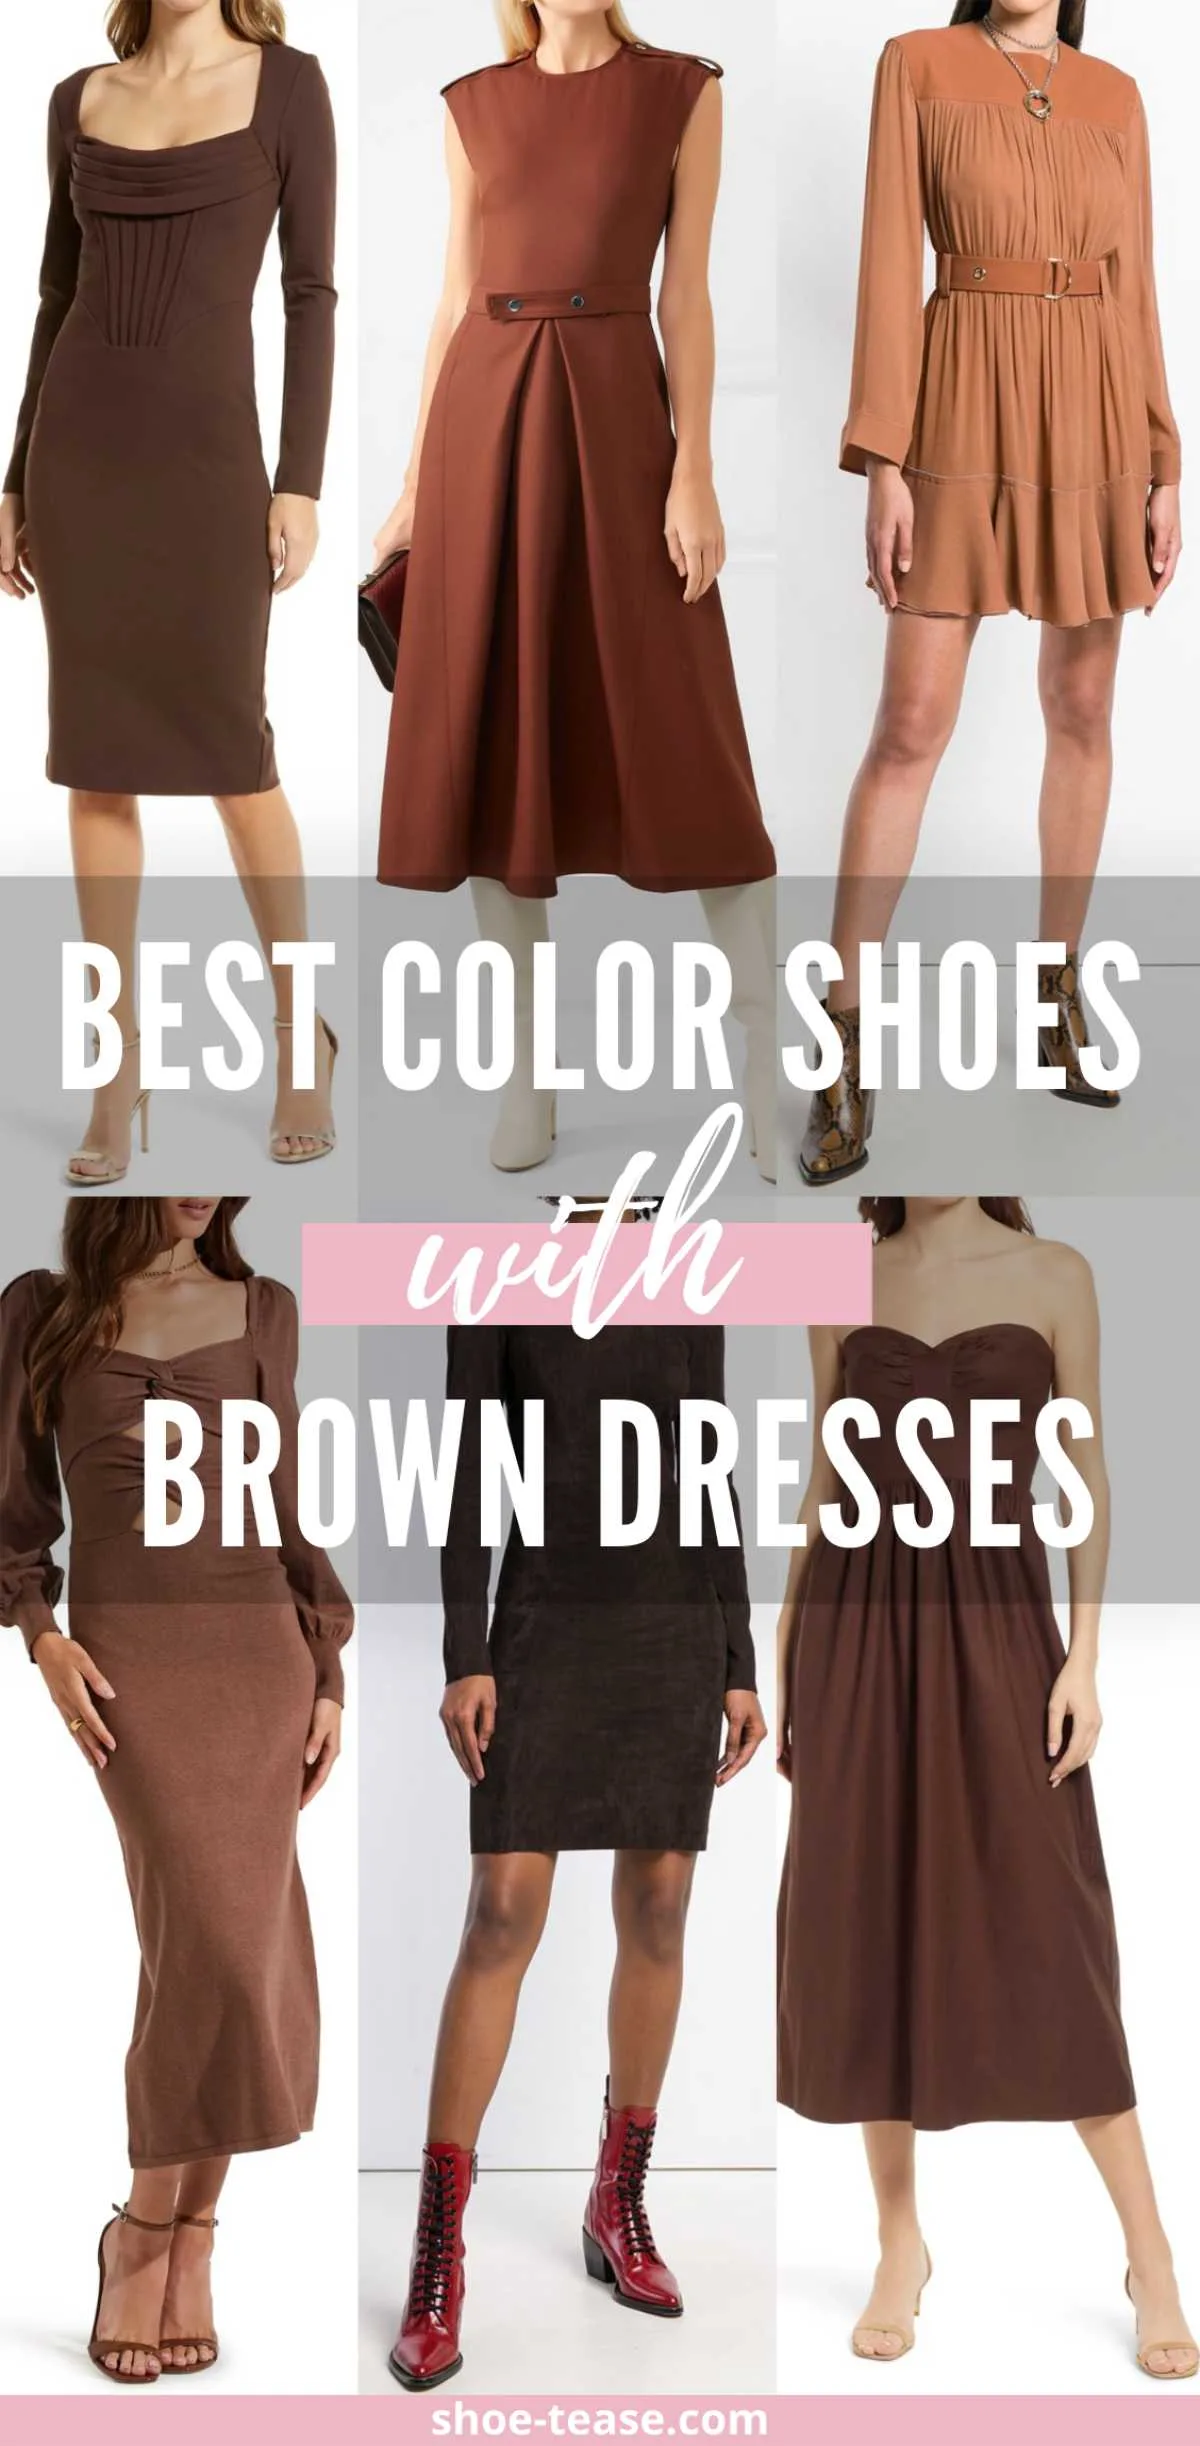 Style Brown Heels With a Minidress  Brown heels outfit, Outfits vestidos,  Mules and dress outfit